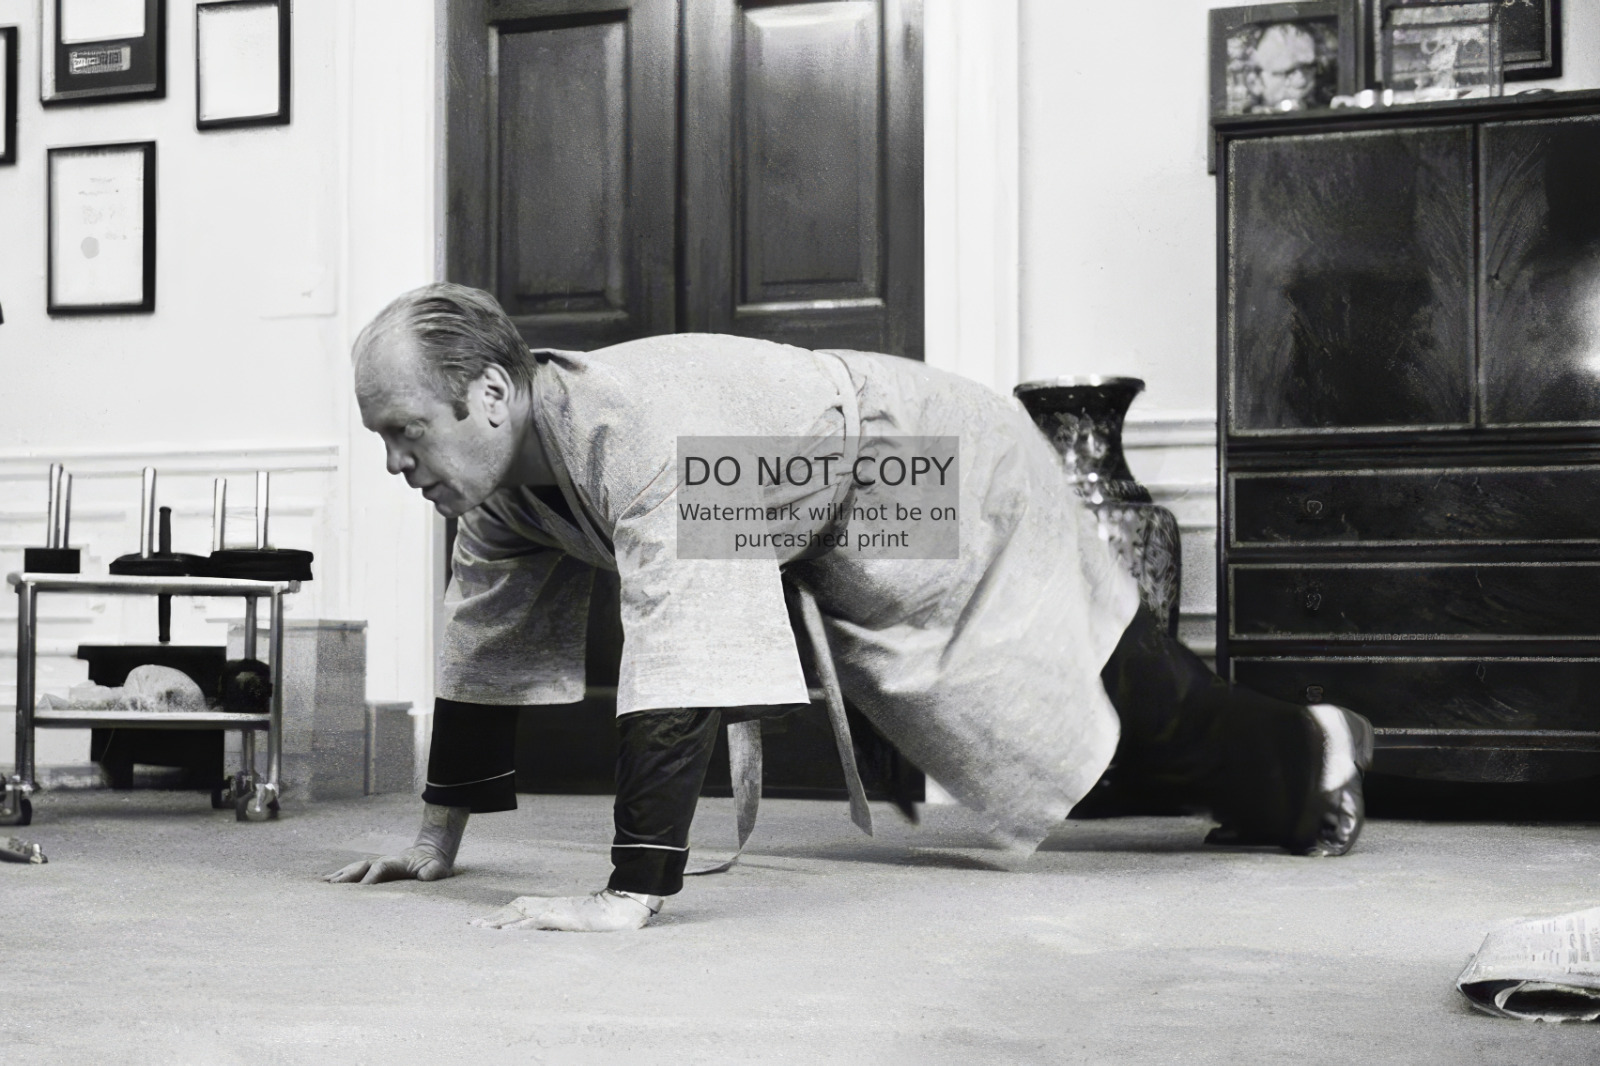 PRESIDENT GERALD FORD DOING PUSH-UPS IN THE WHITE HOUSE 1975 4X6 PHOTO POSTCARD